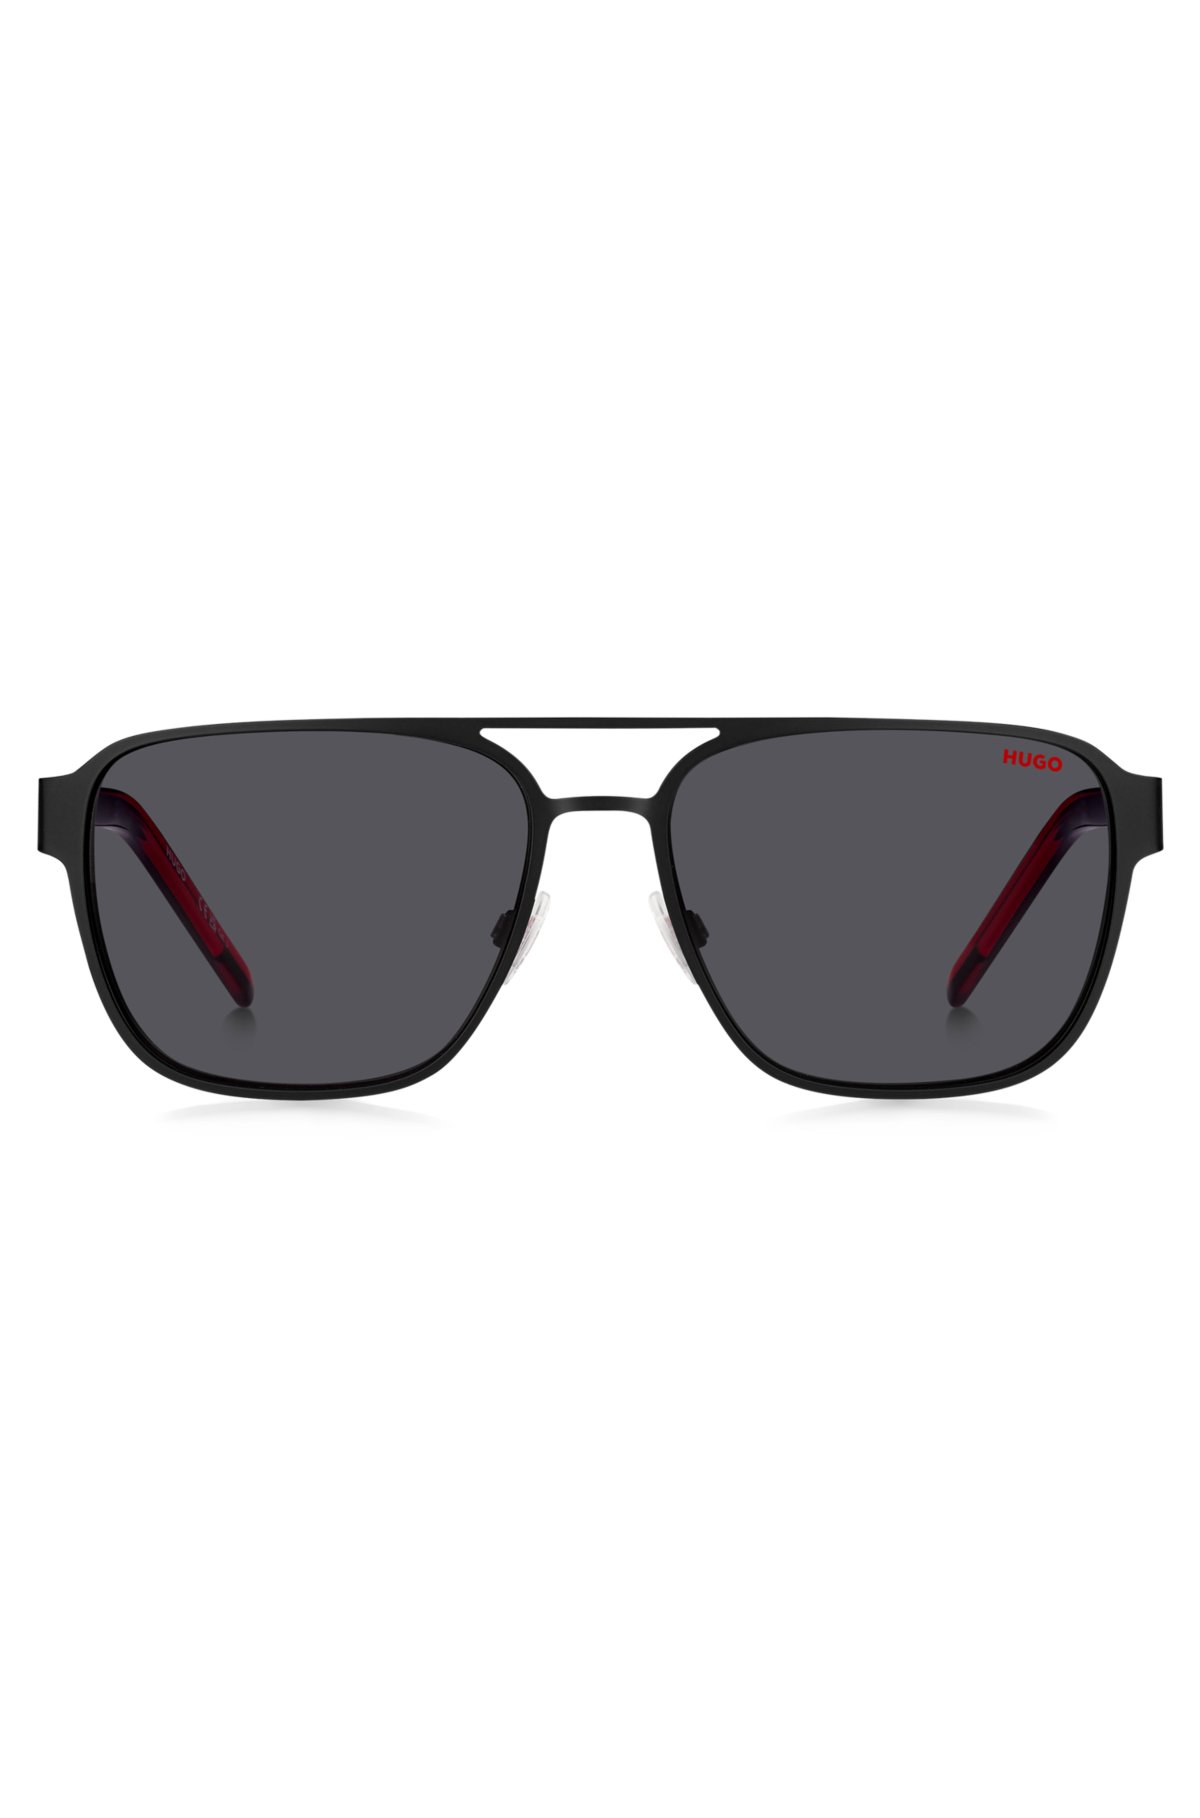 Double-bridge sunglasses in black with layered temples, Black